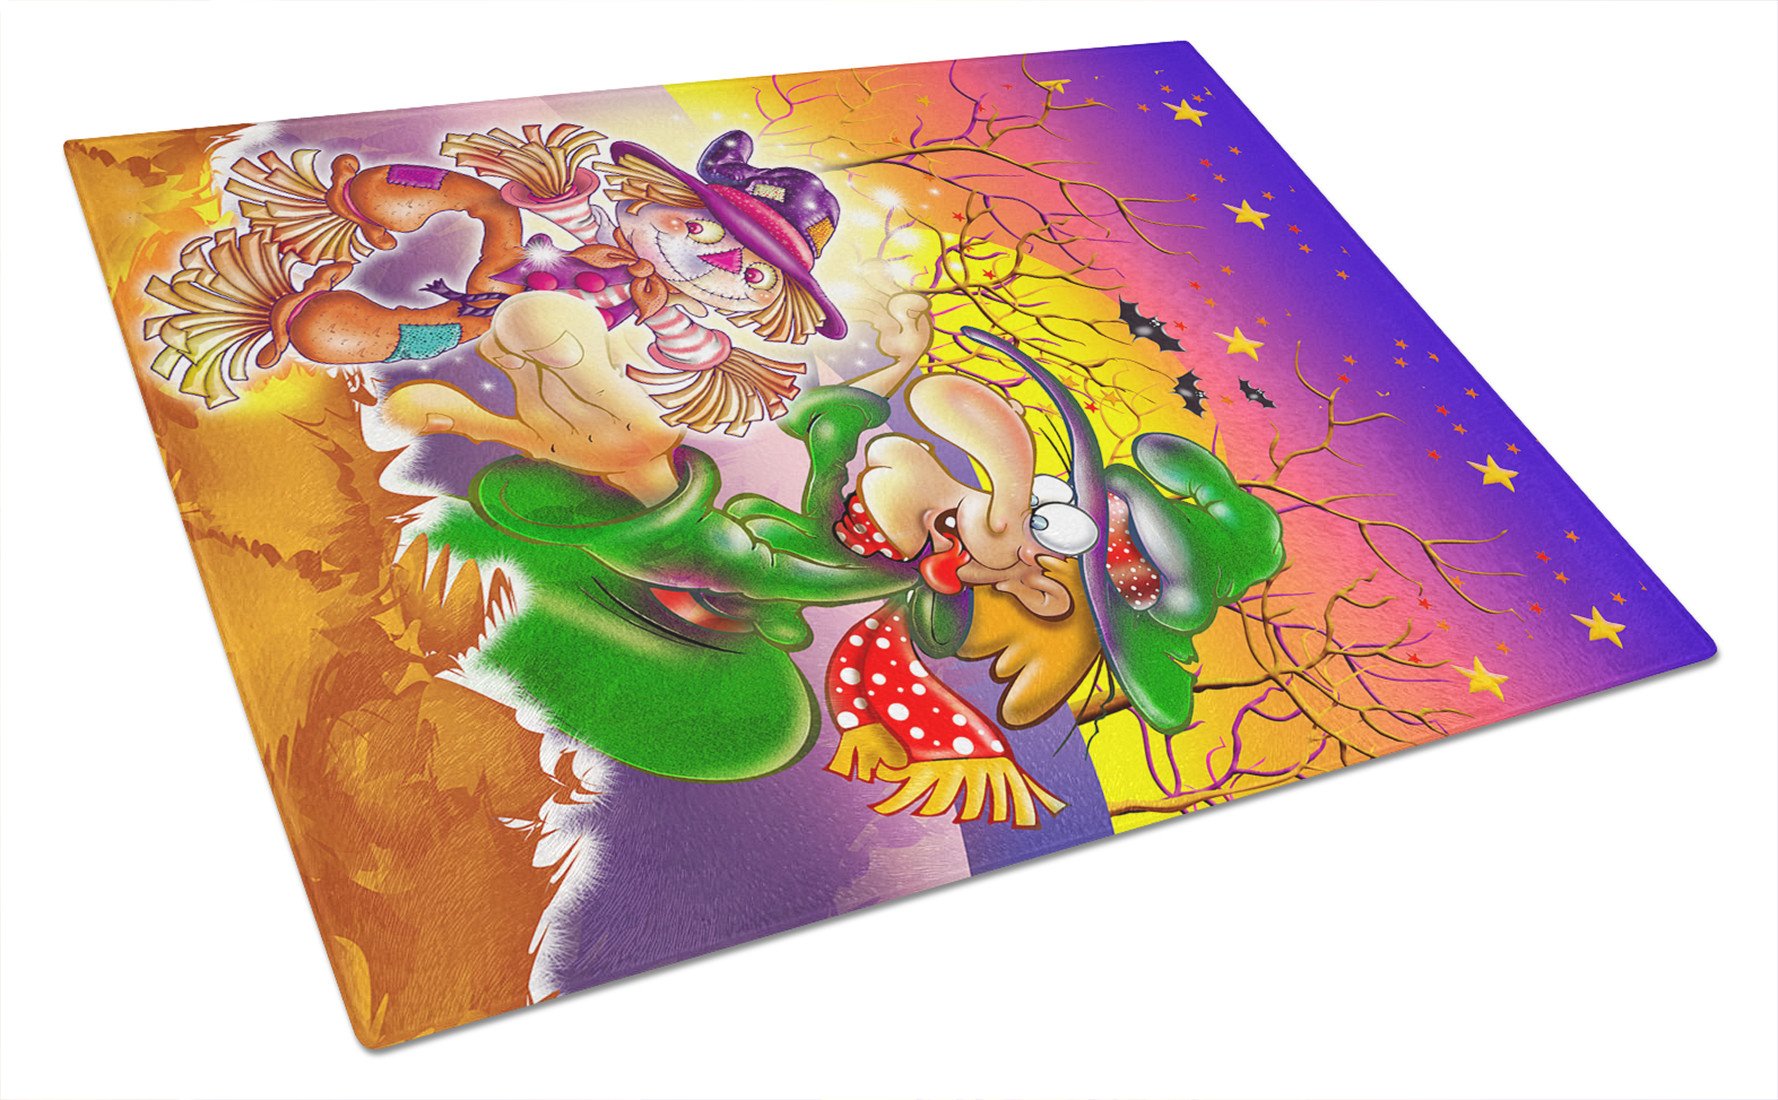 Witch Voodoo Scarecrow Halloween Glass Cutting Board Large APH5129LCB by Caroline's Treasures